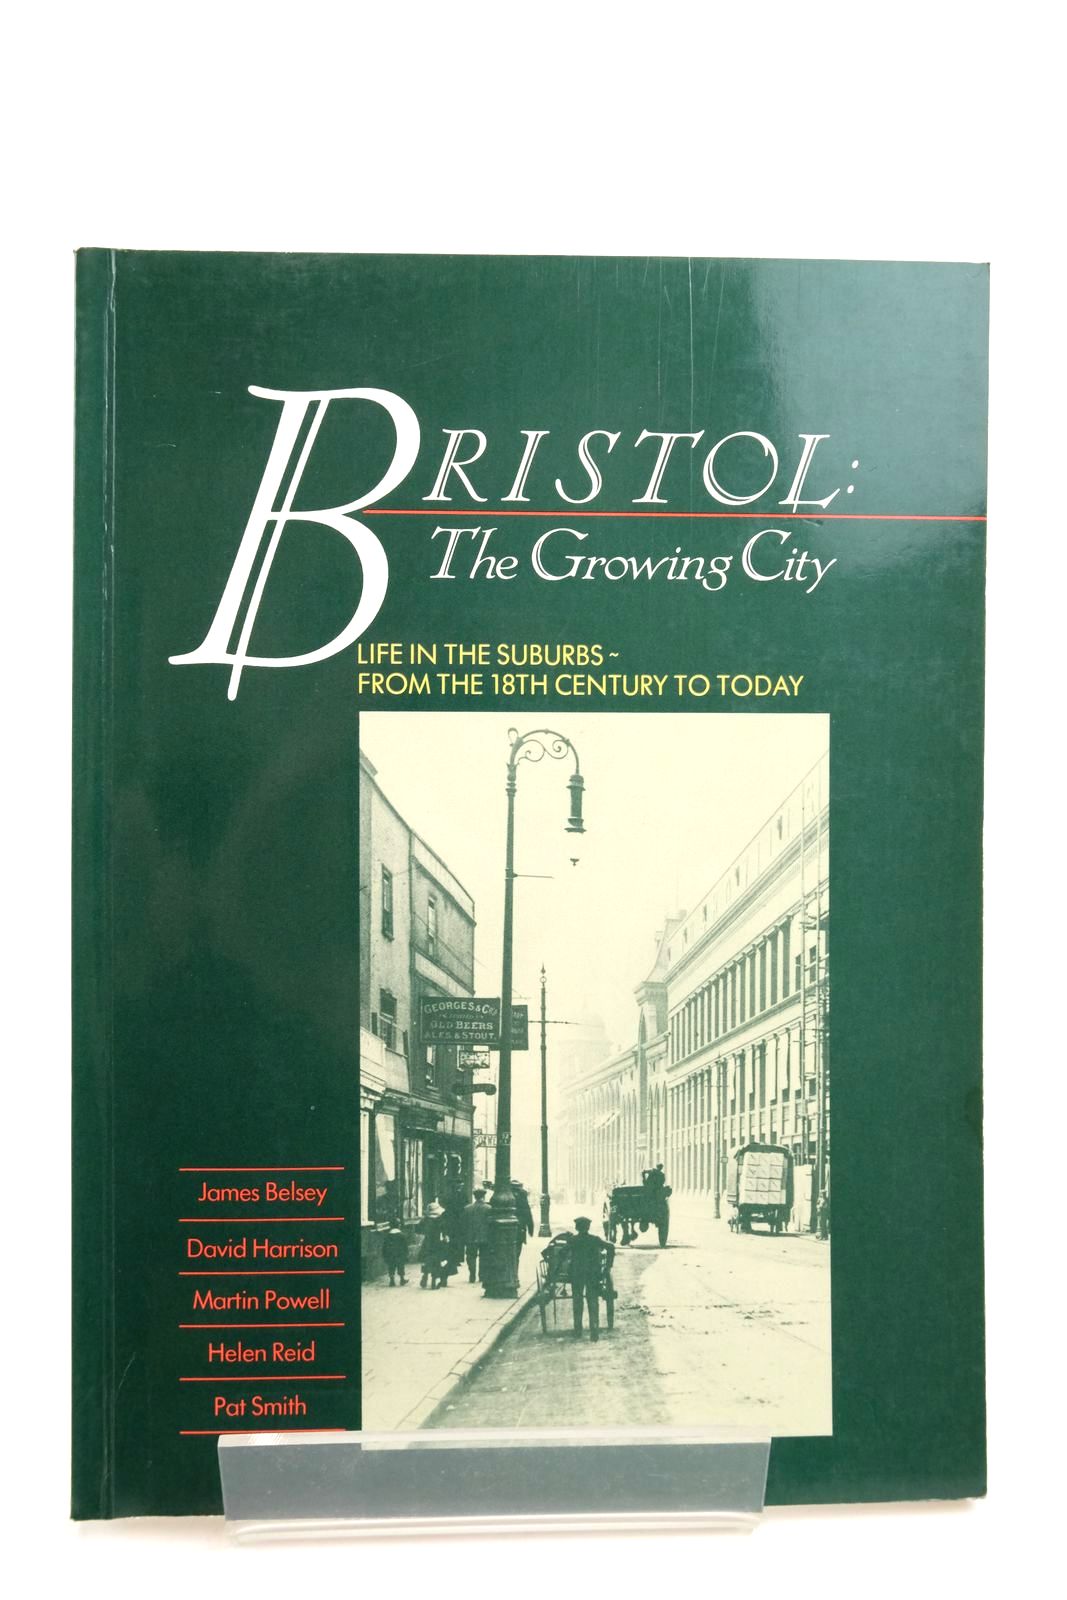 Photo of BRISTOL: THE GROWING CITY written by Belsey, James Harrison, David et al,  published by Redcliffe Press Ltd. (STOCK CODE: 2138845)  for sale by Stella & Rose's Books